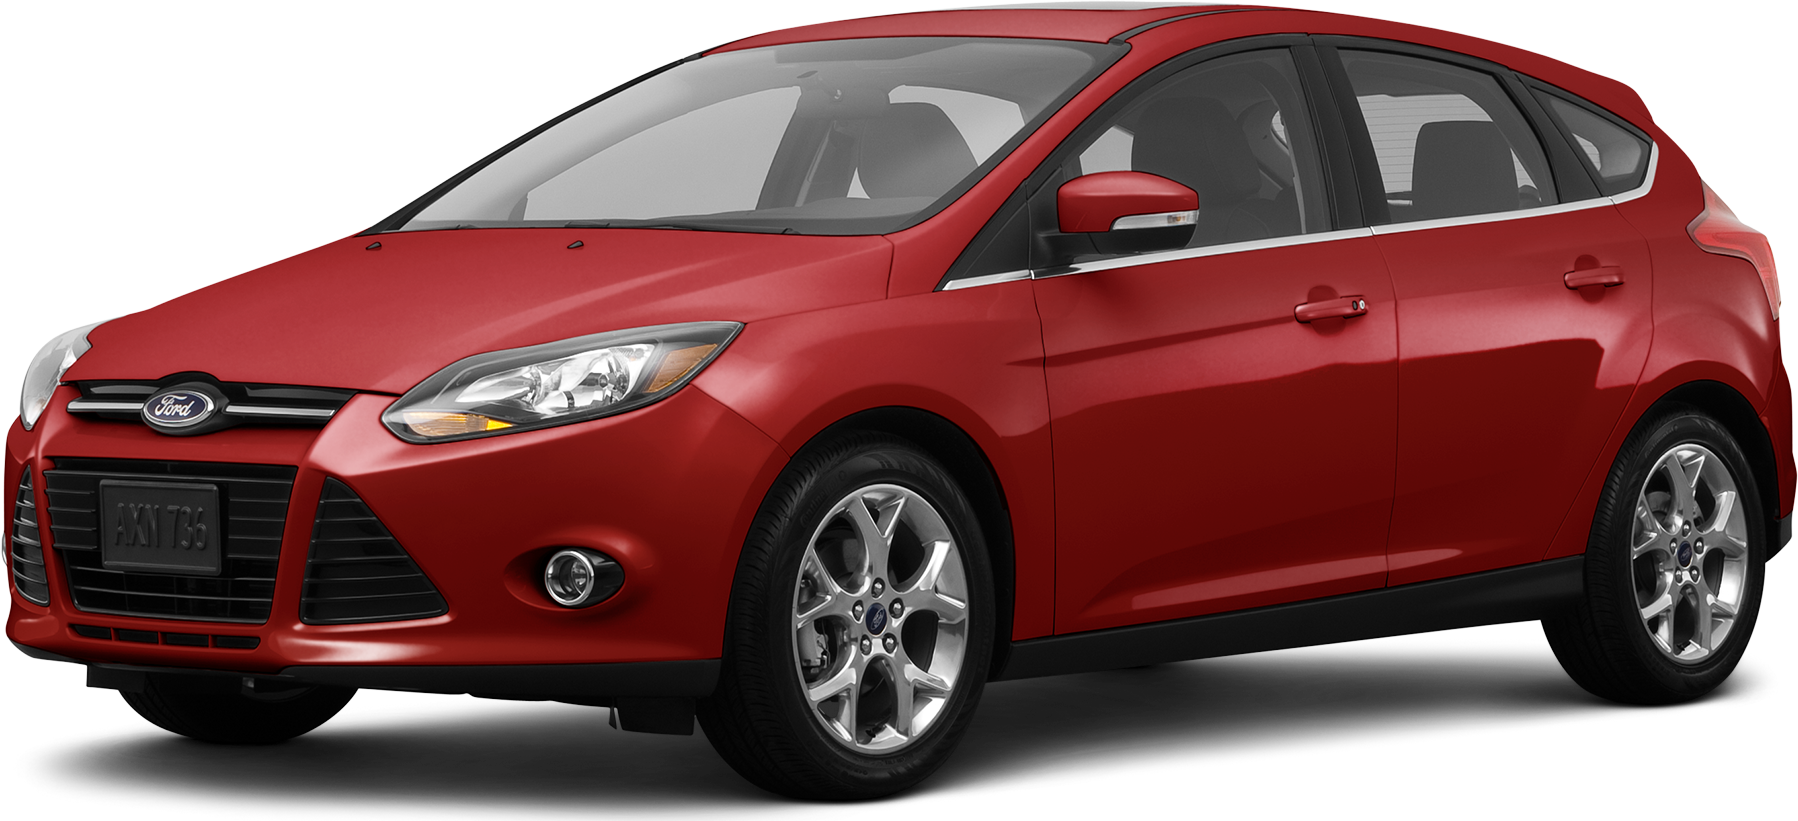 2013 Ford Focus Price, Value, Ratings & Reviews